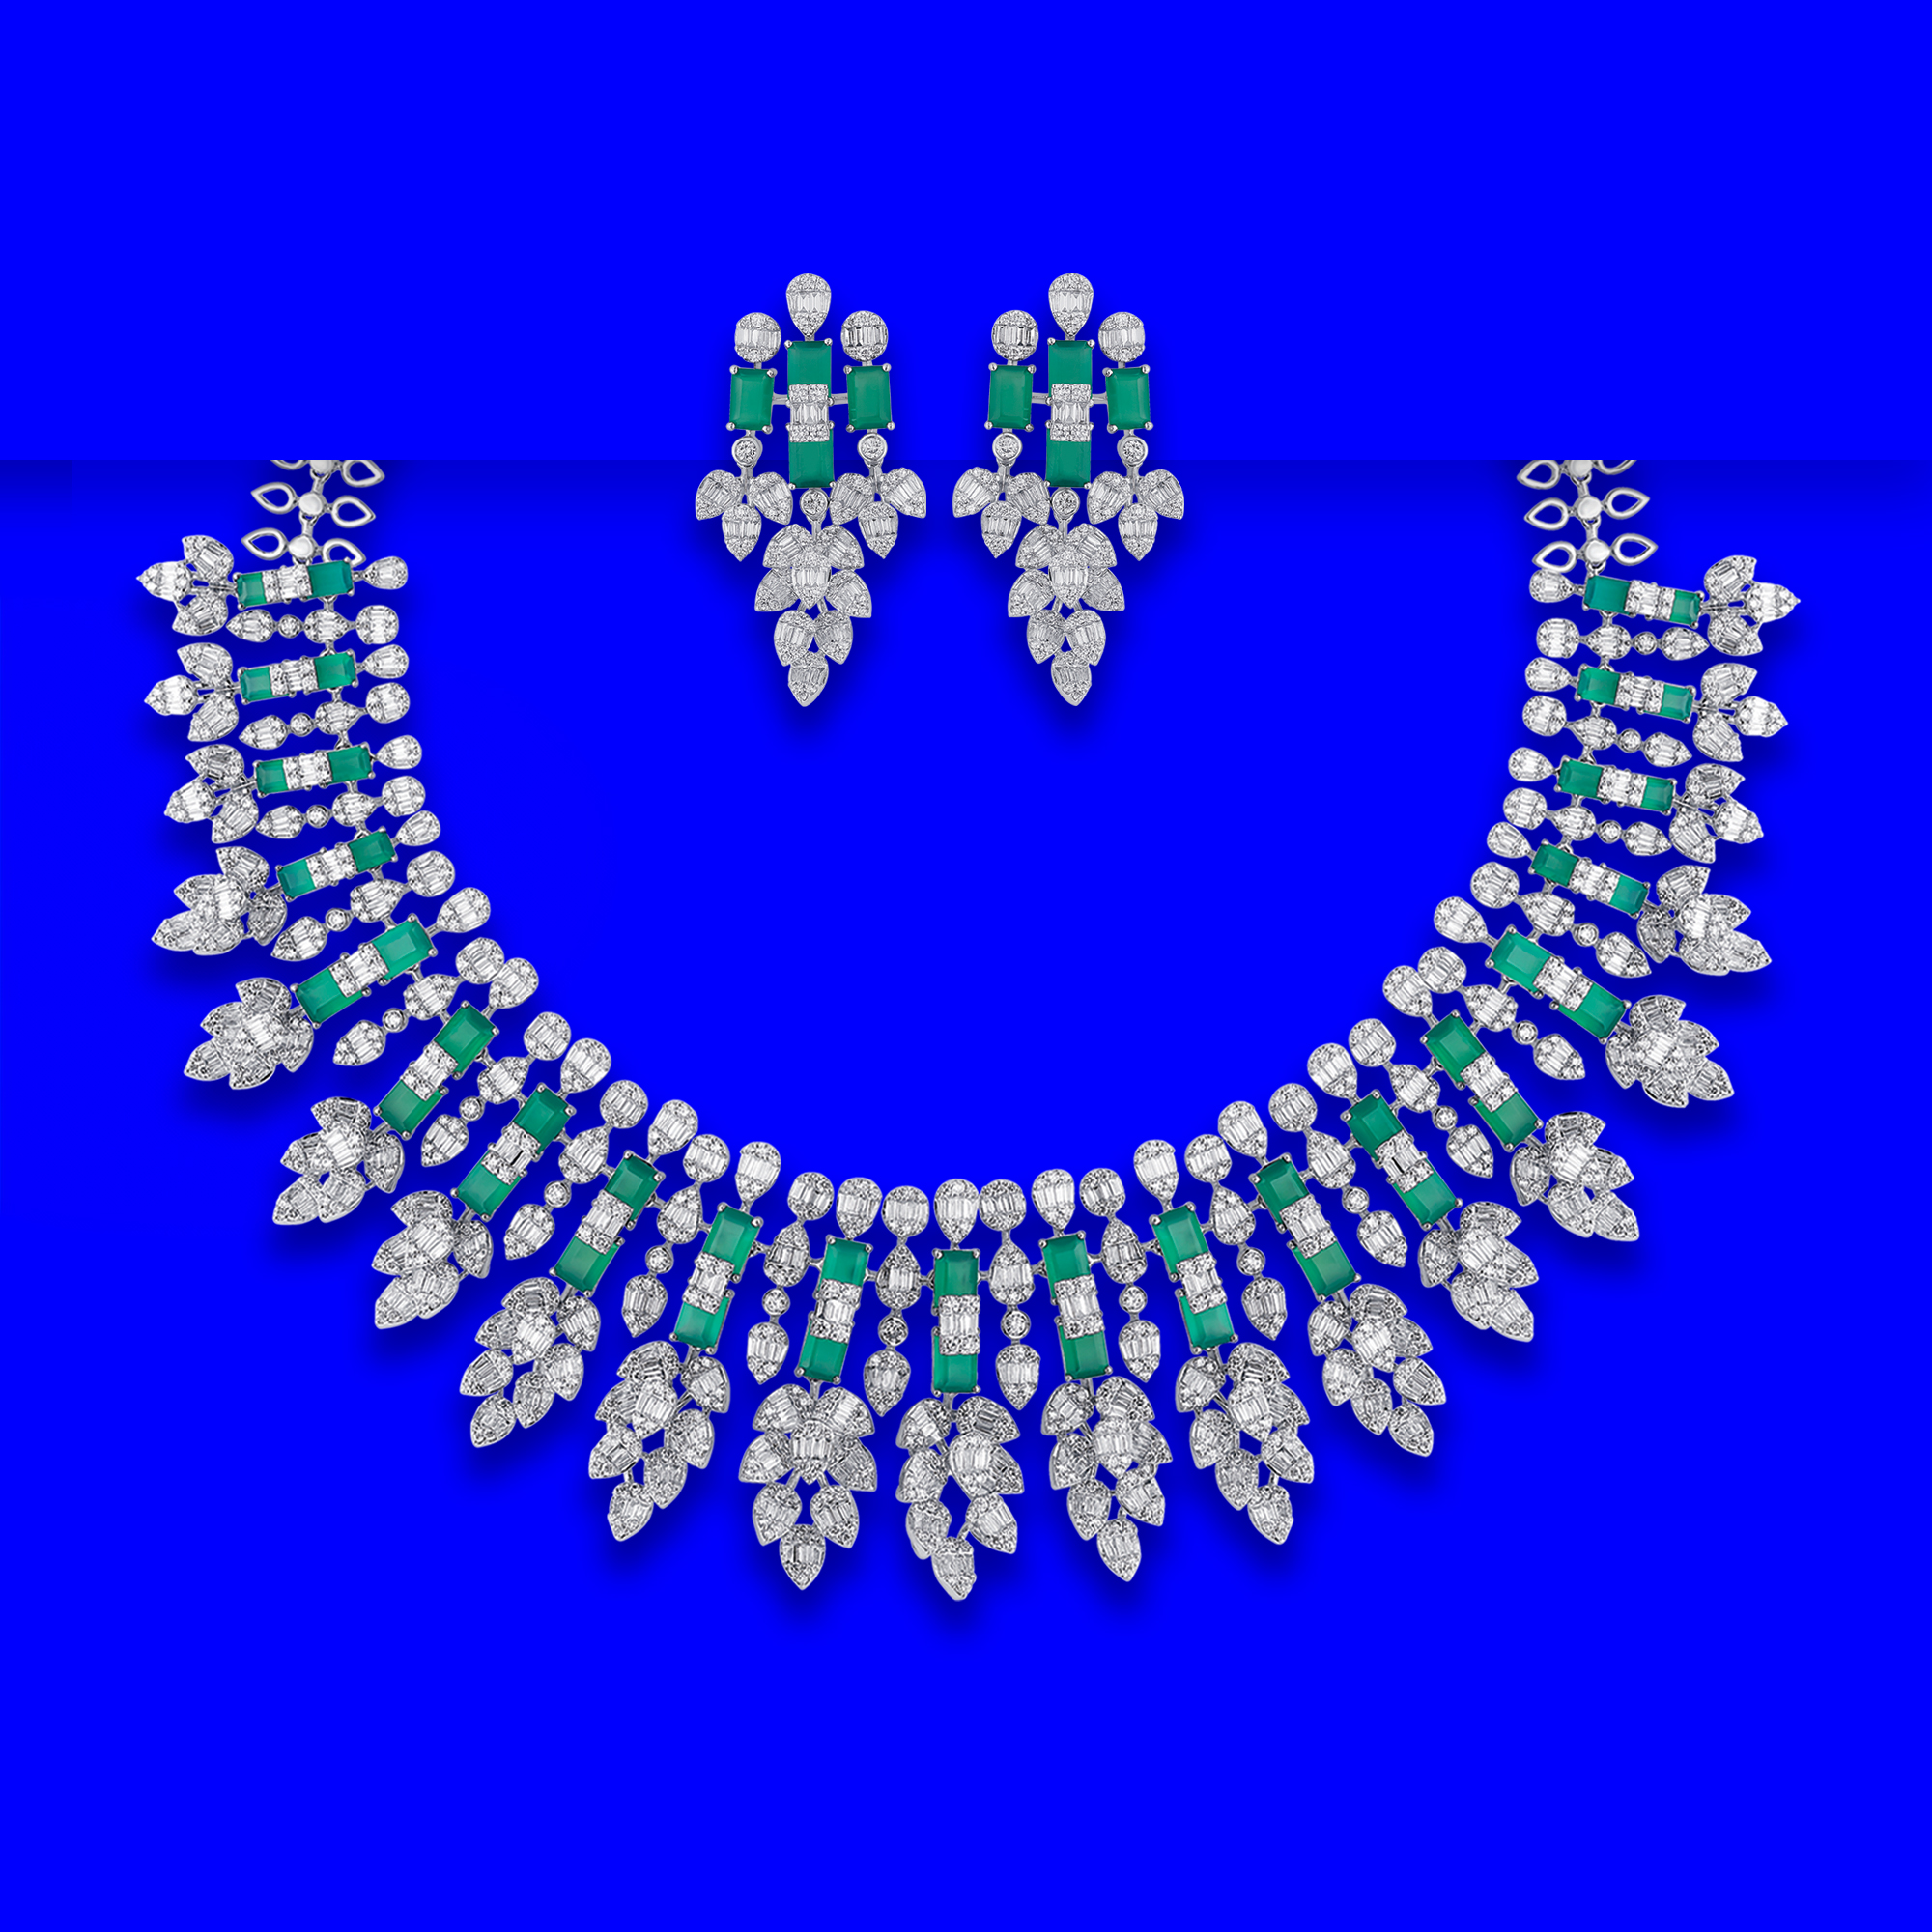 18K WG Diamond Necklace and Earring Set